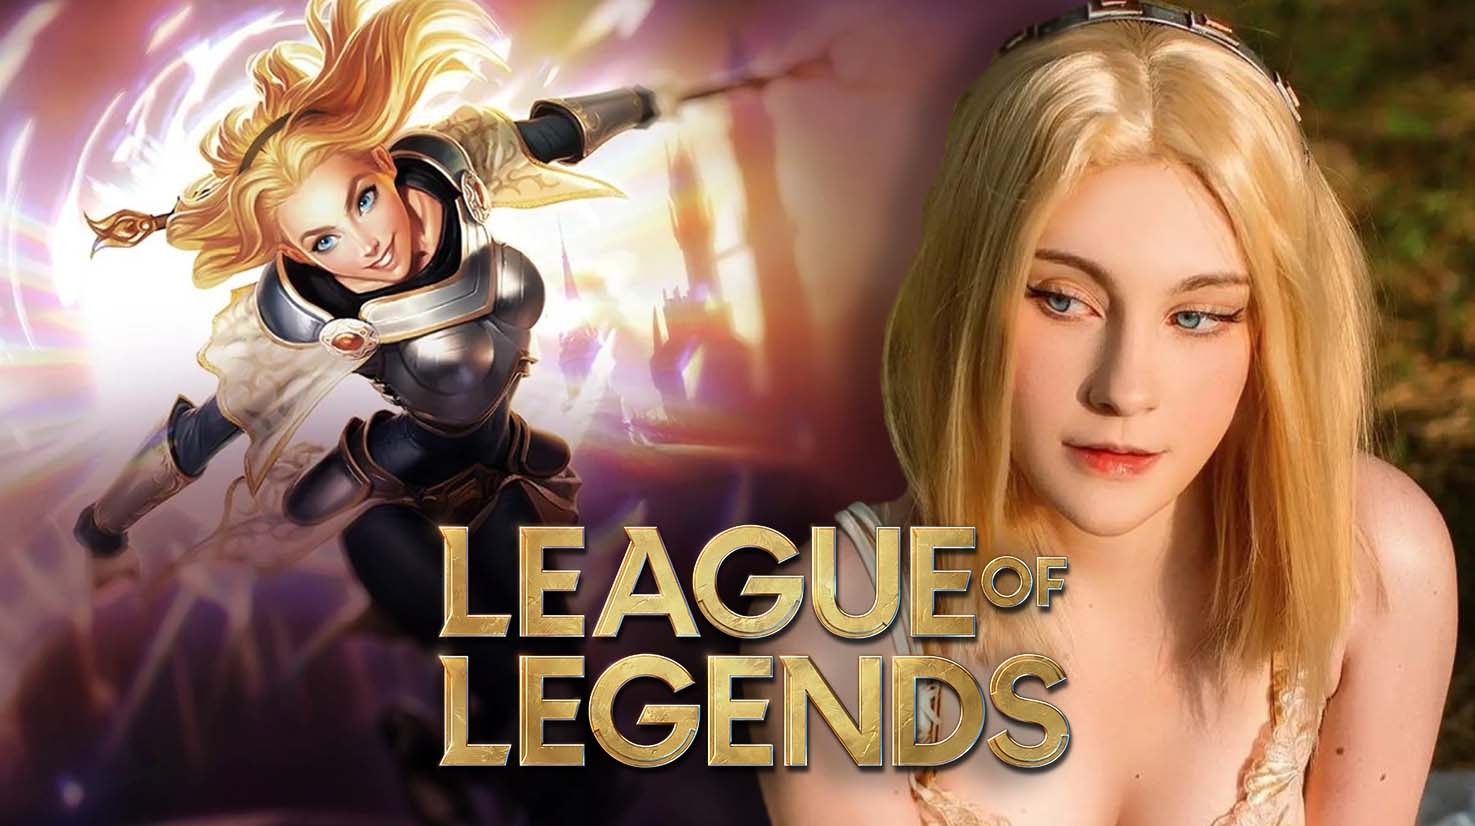 League of Legends Lux Cosplay